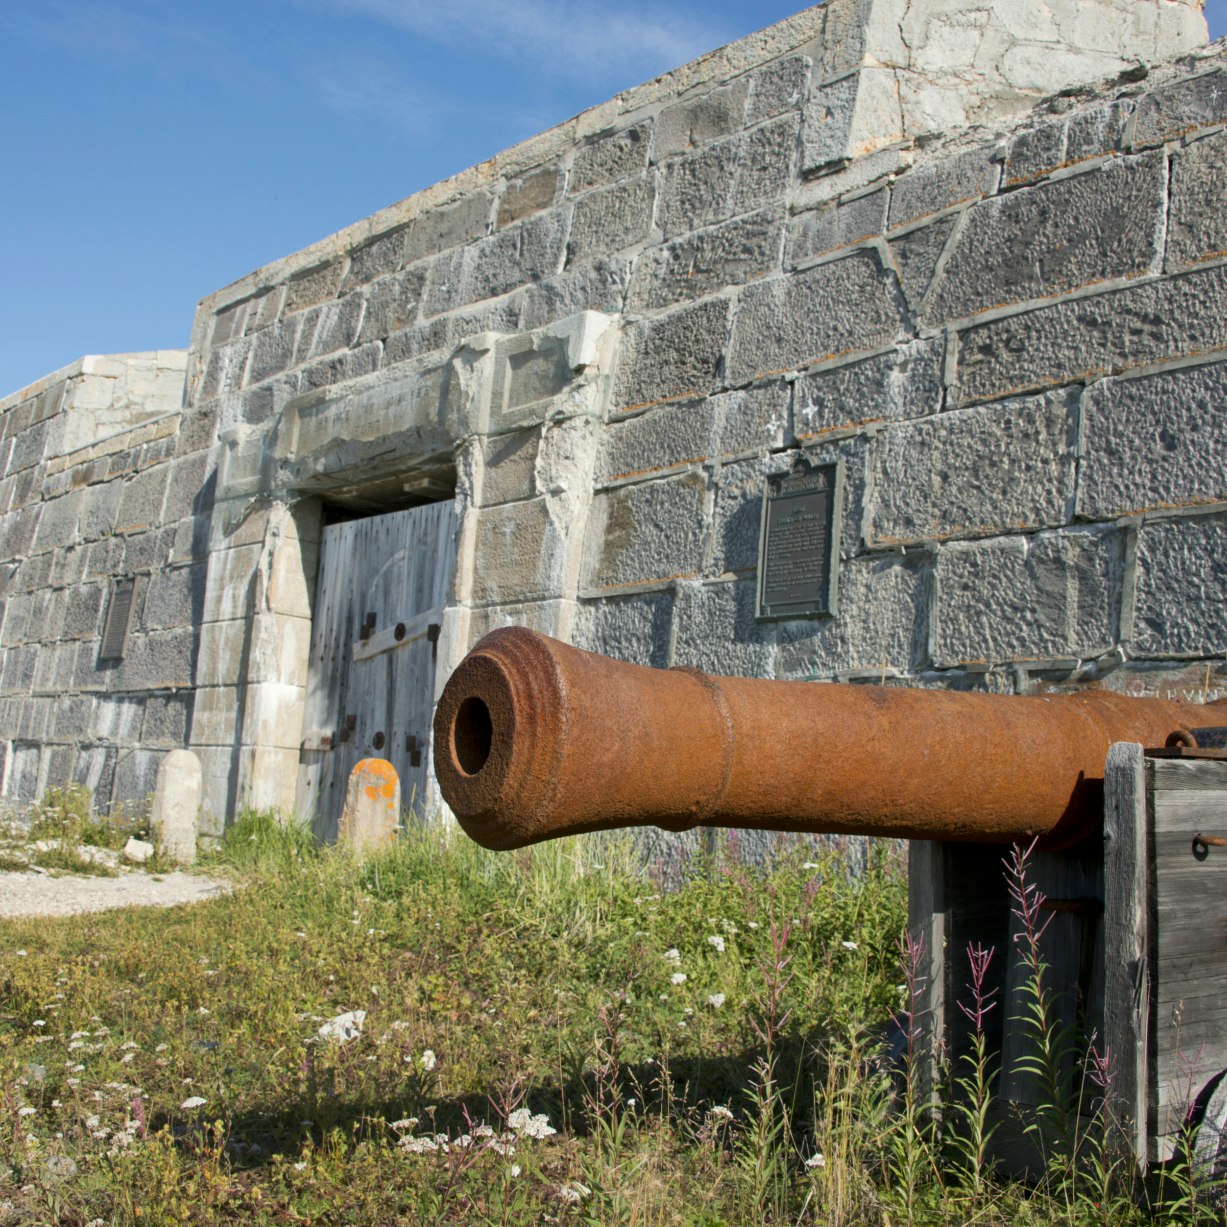 Parks Canada, National Historic Site of Canada, Prince of Wales Fort, Antique cannon in front of fort wall, Churchill, Manitoba, Canada